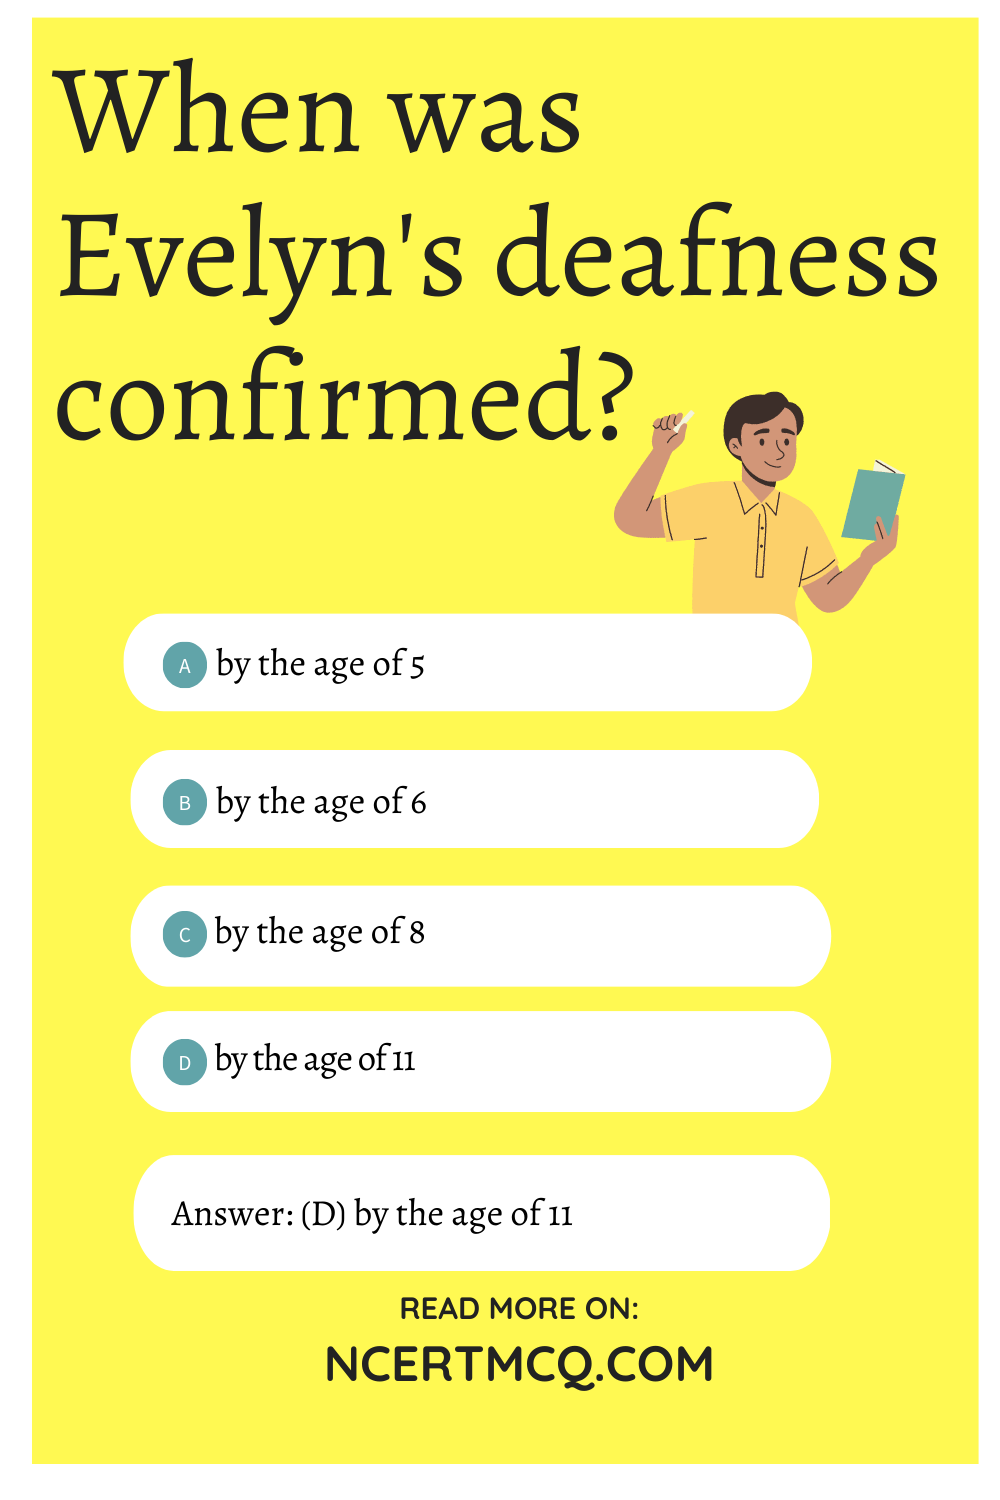 When was Evelyn's deafness confirmed?